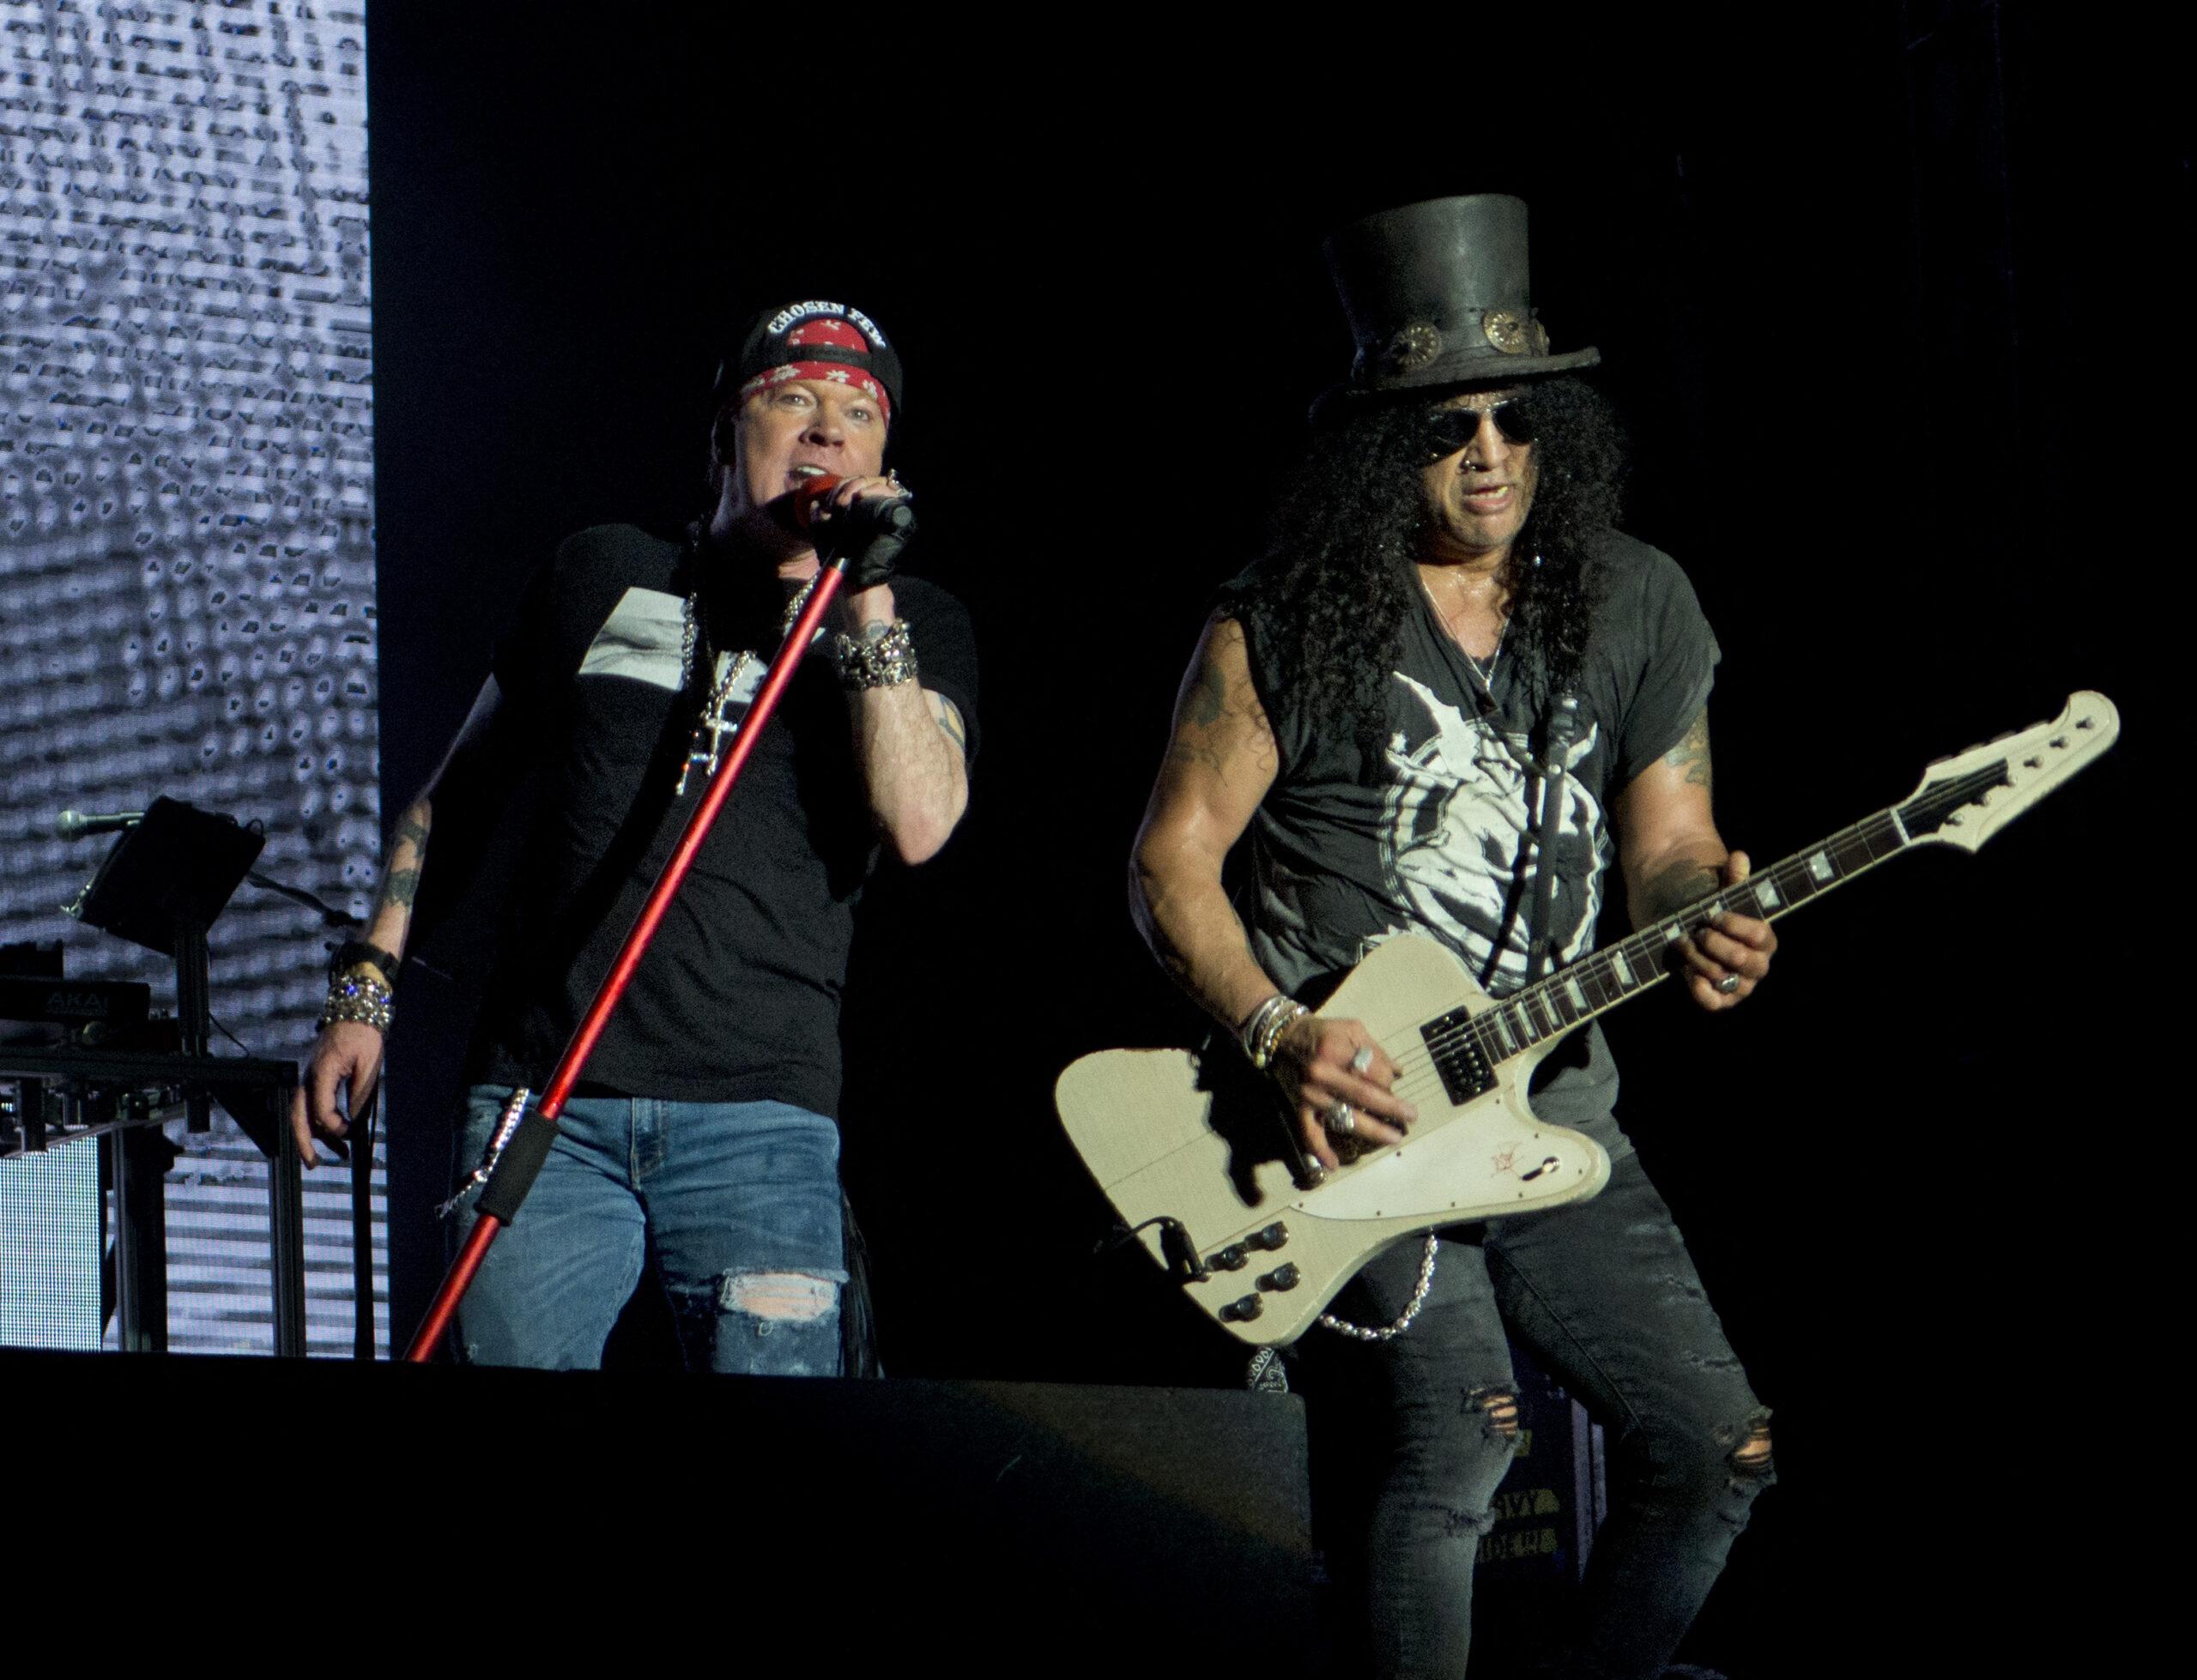 Rock Legends Guns N’ Roses Have A History Of Pulling The Plug On Concerts